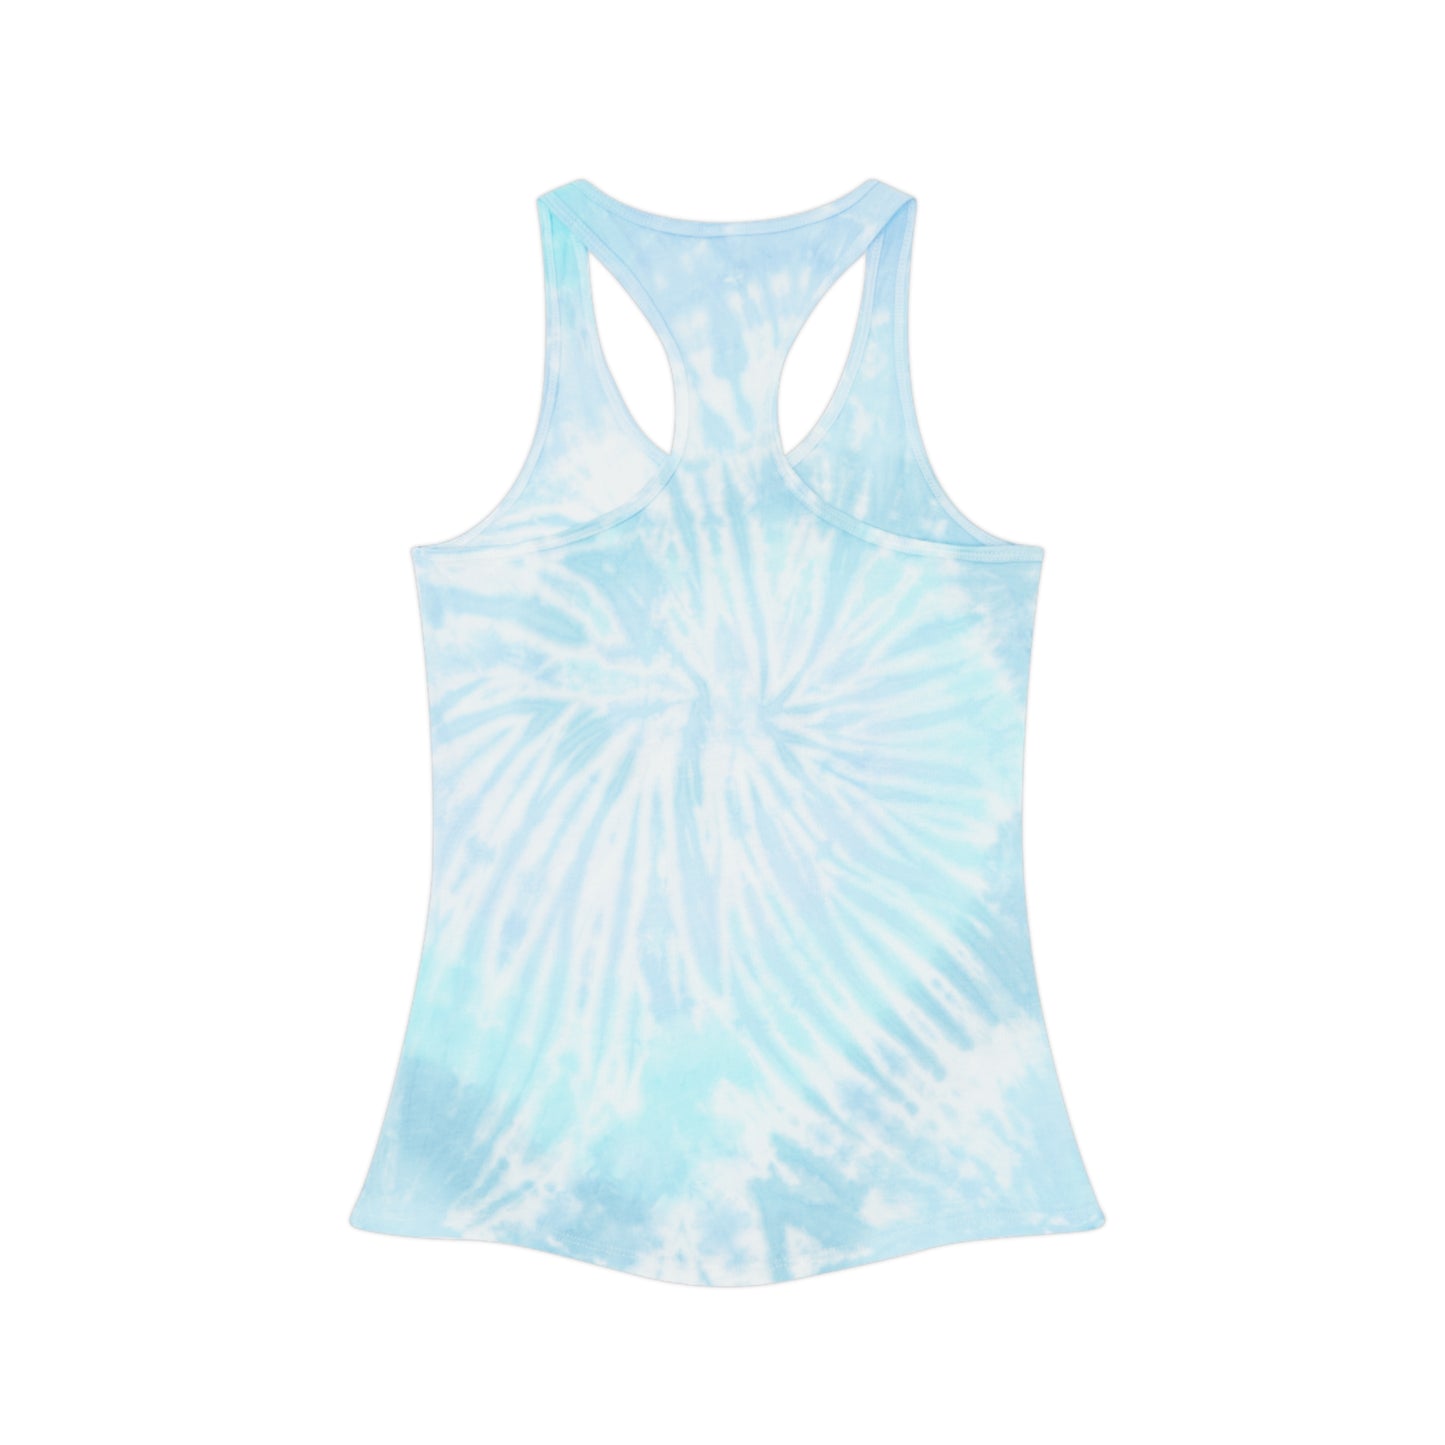 Forever Chasing Sunsets Tie Dye Women's Racerback Tank Top